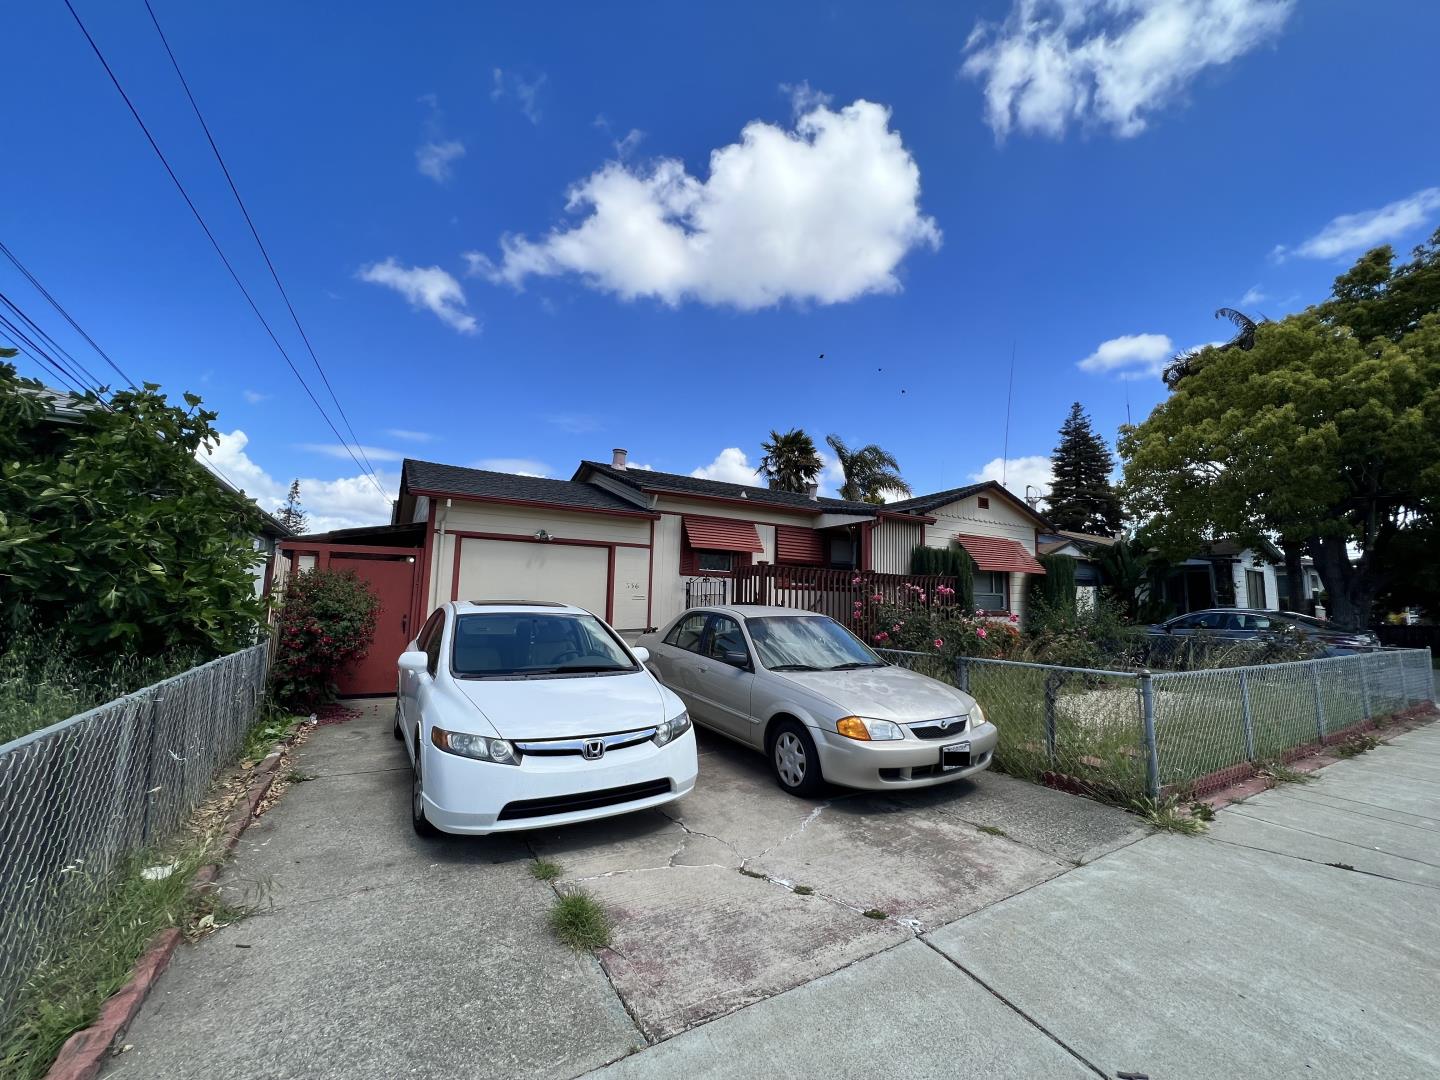 Photo of 336 Orchard Ave in Hayward, CA